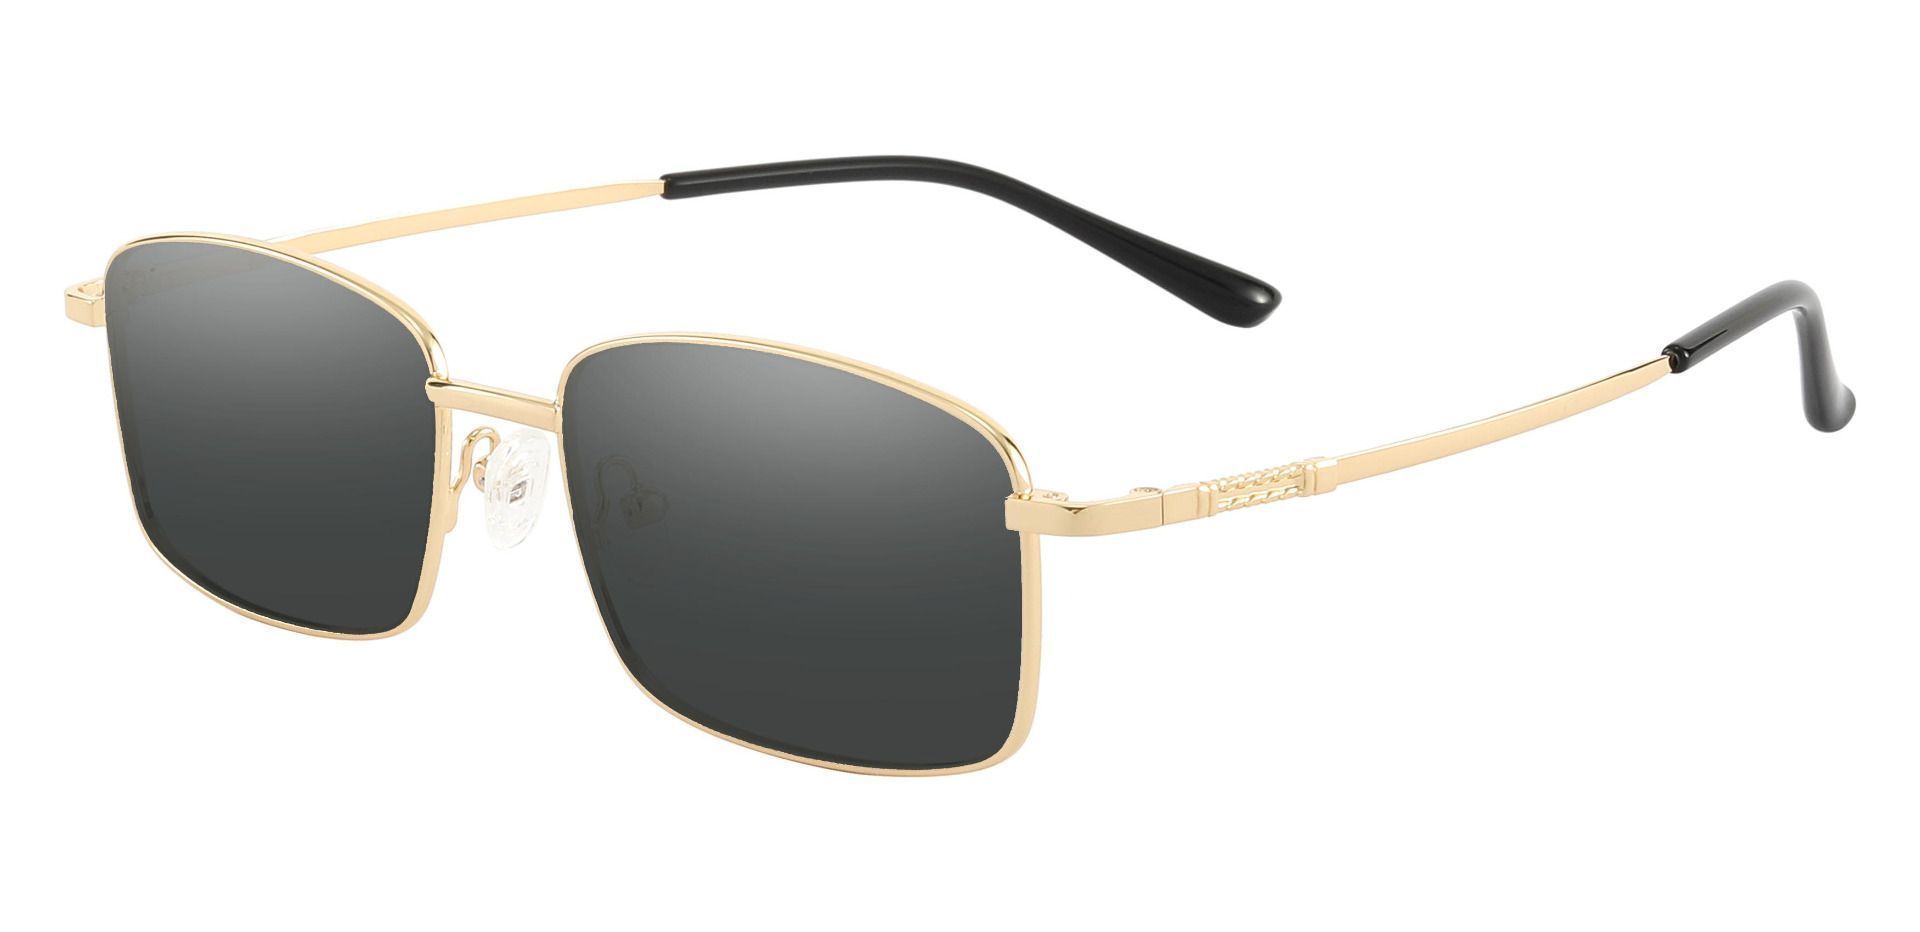 Clyde Rectangle Non-Rx Sunglasses - Gold Frame With Gray Lenses